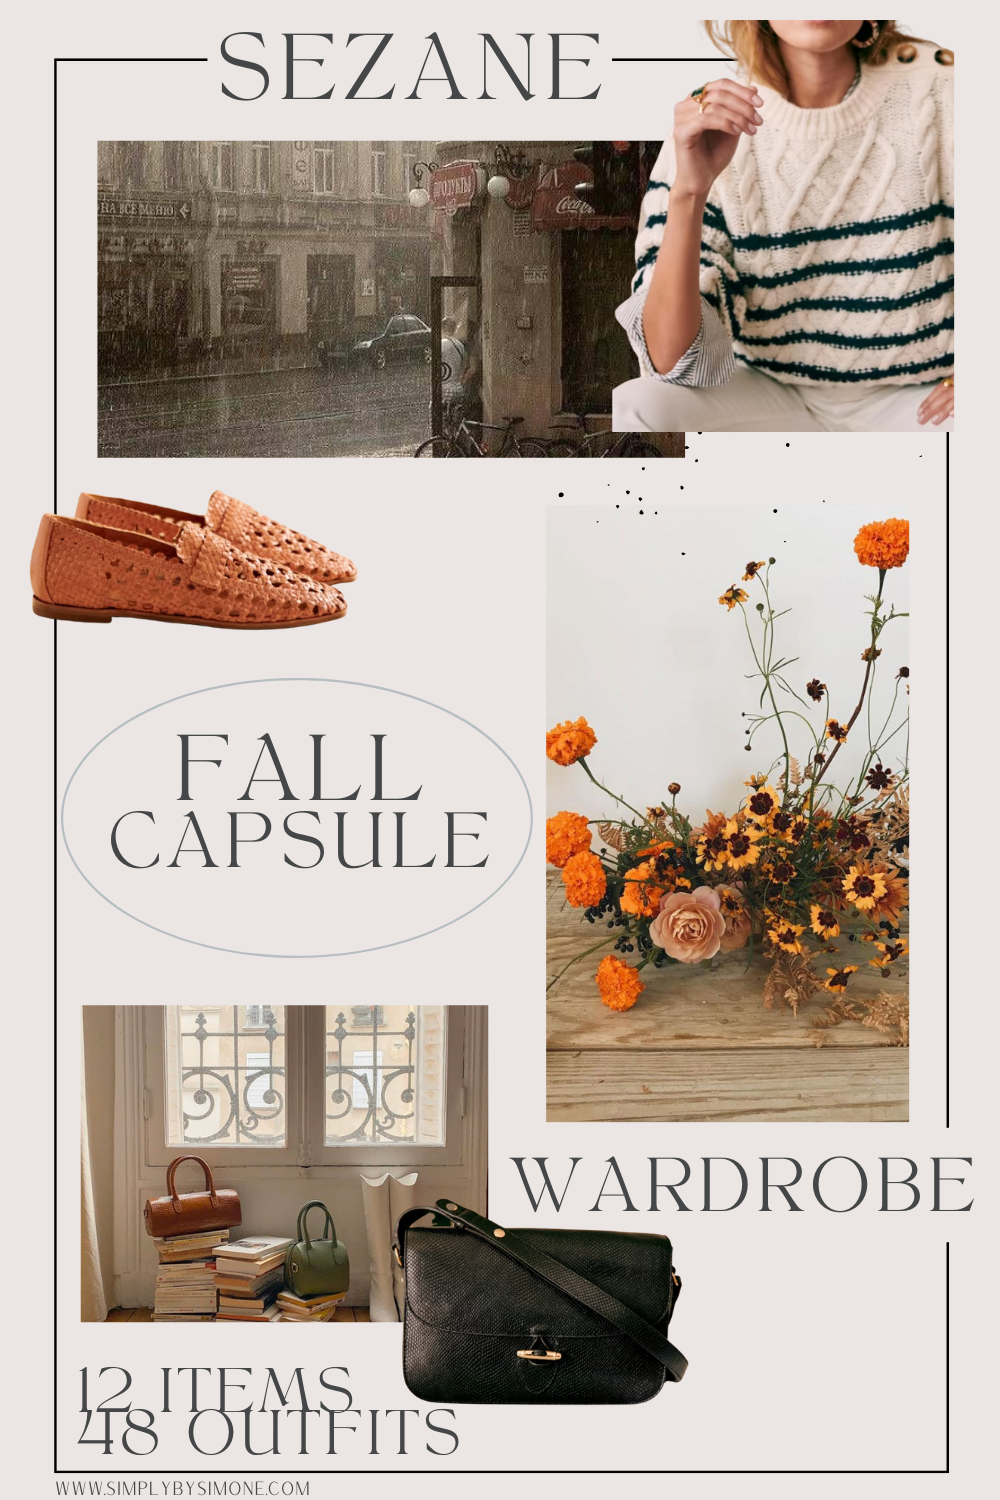 Sezane Fall Capsule Wardrobe – 12 Pieces, 48 Outfits